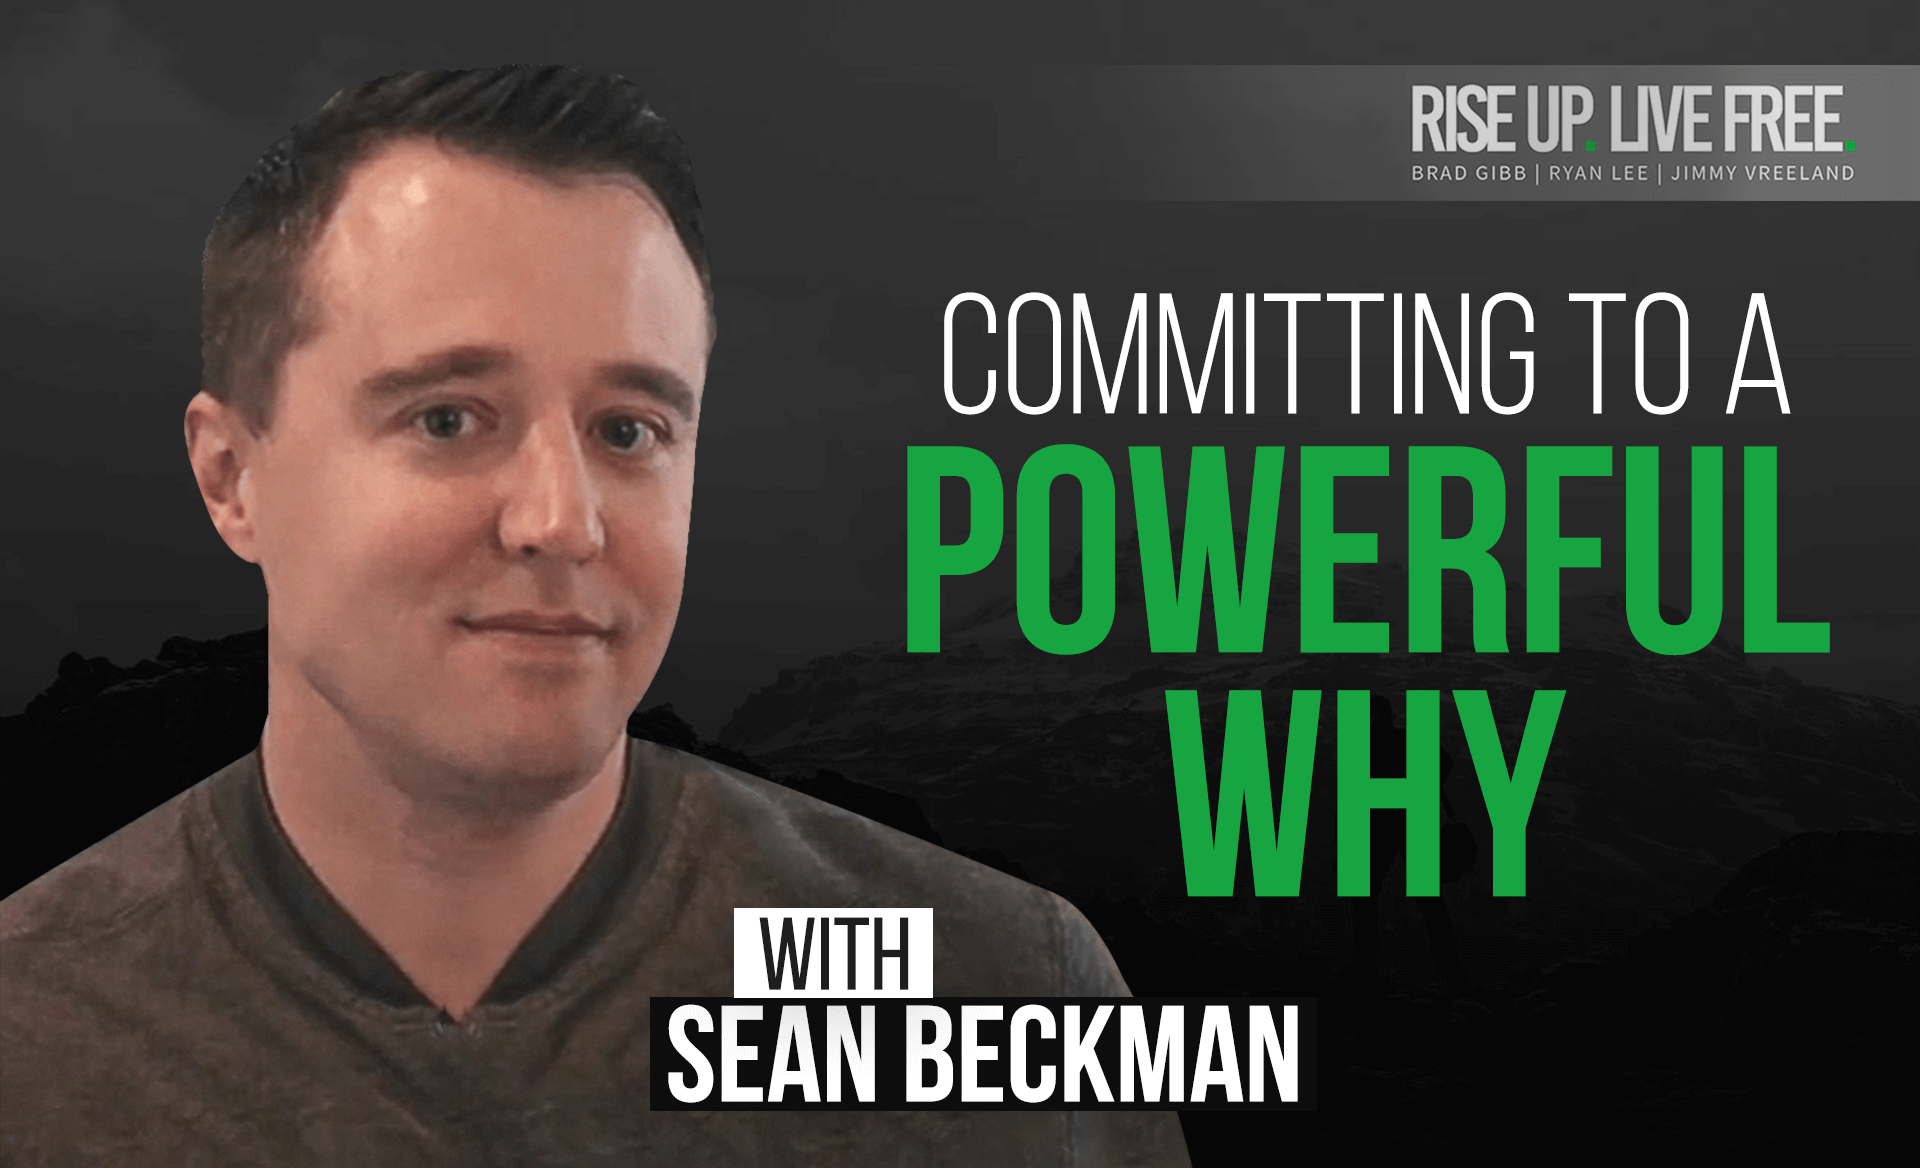 Committing To A Powerful "WHY" With Sean Beckman